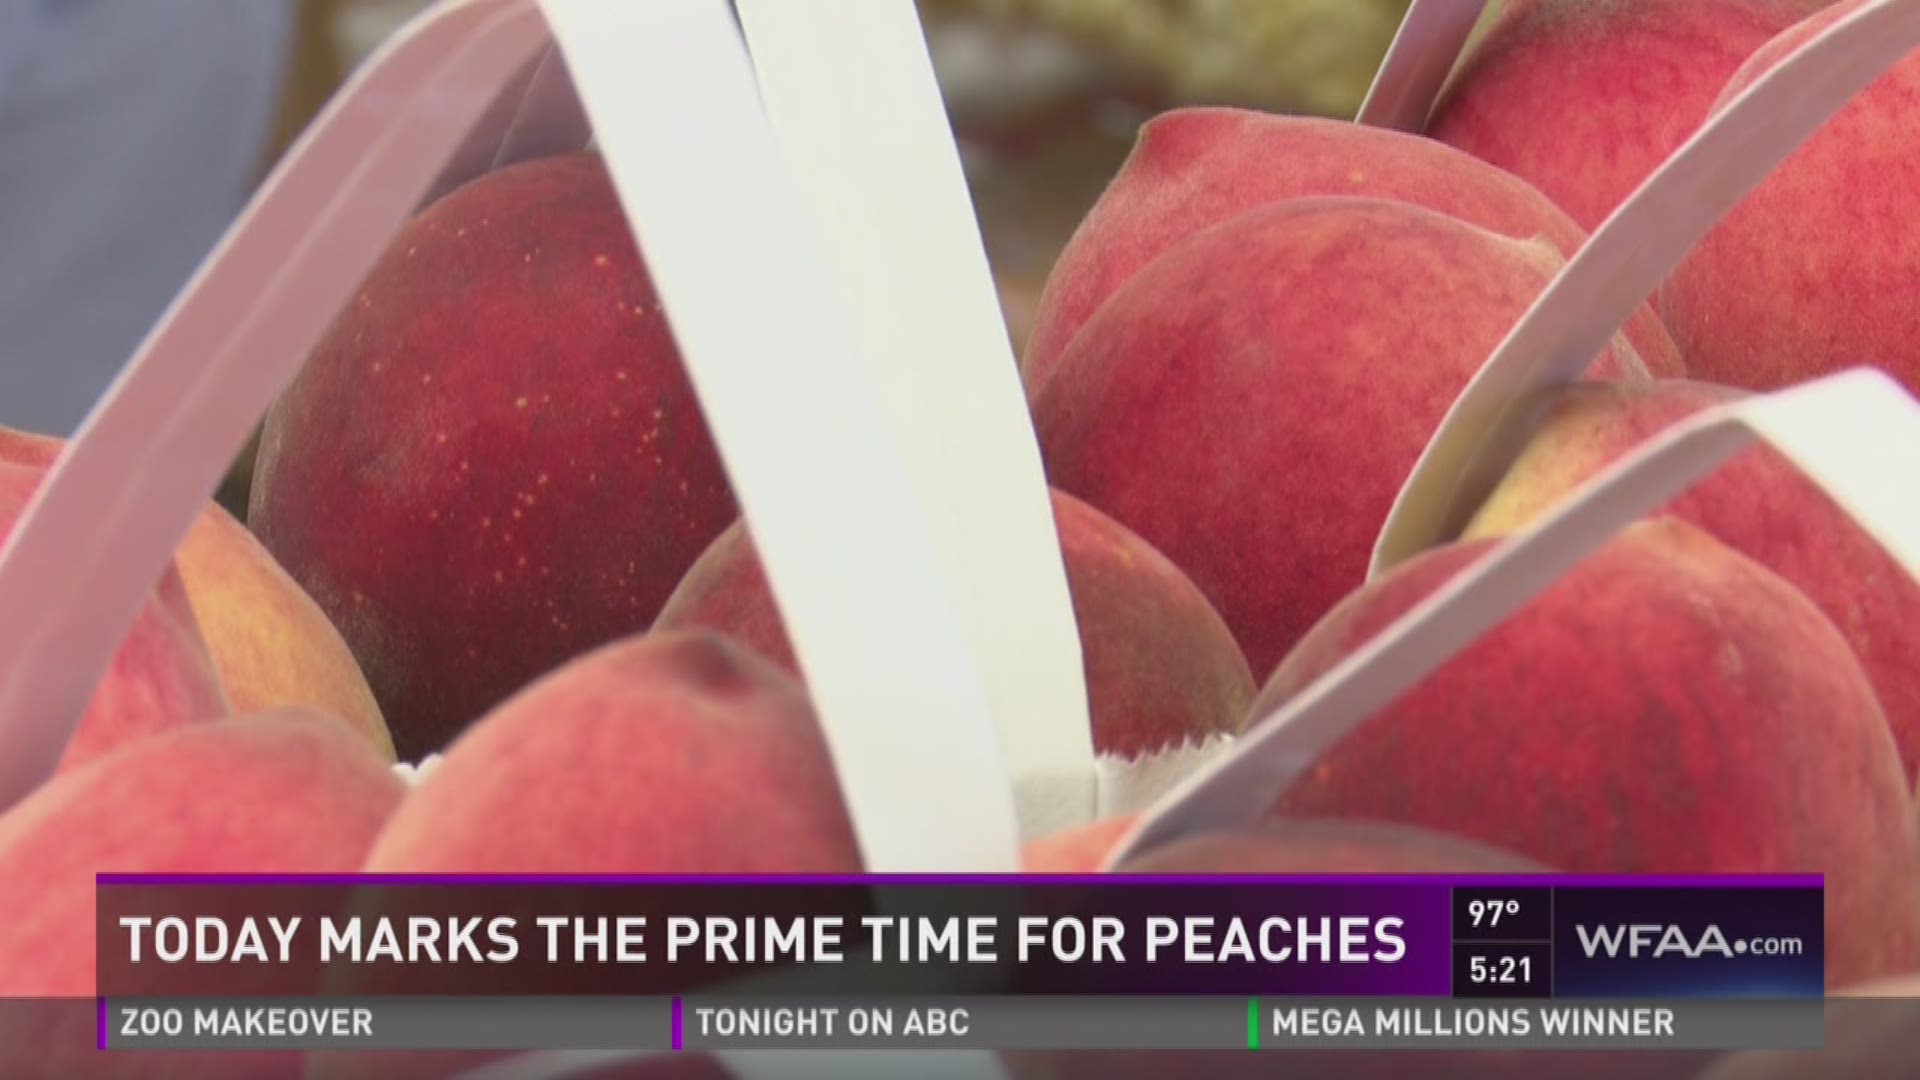 Today marks the prime time for peaches